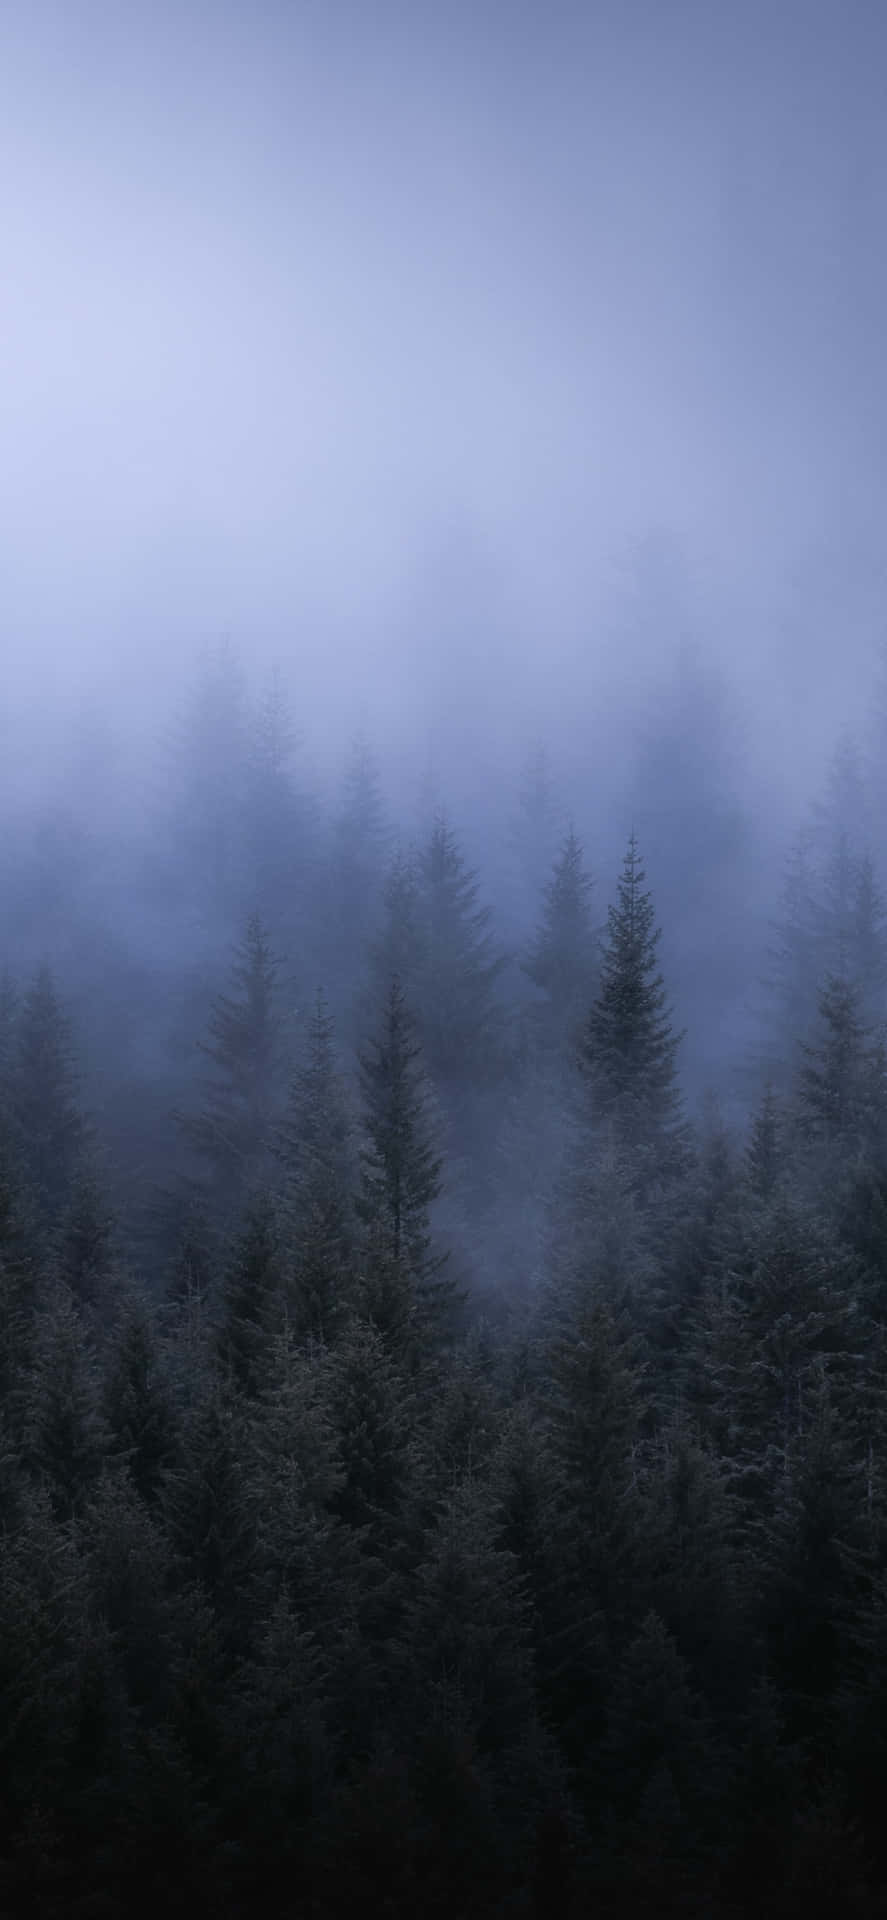 A Foggy Forest With Trees In The Background Wallpaper